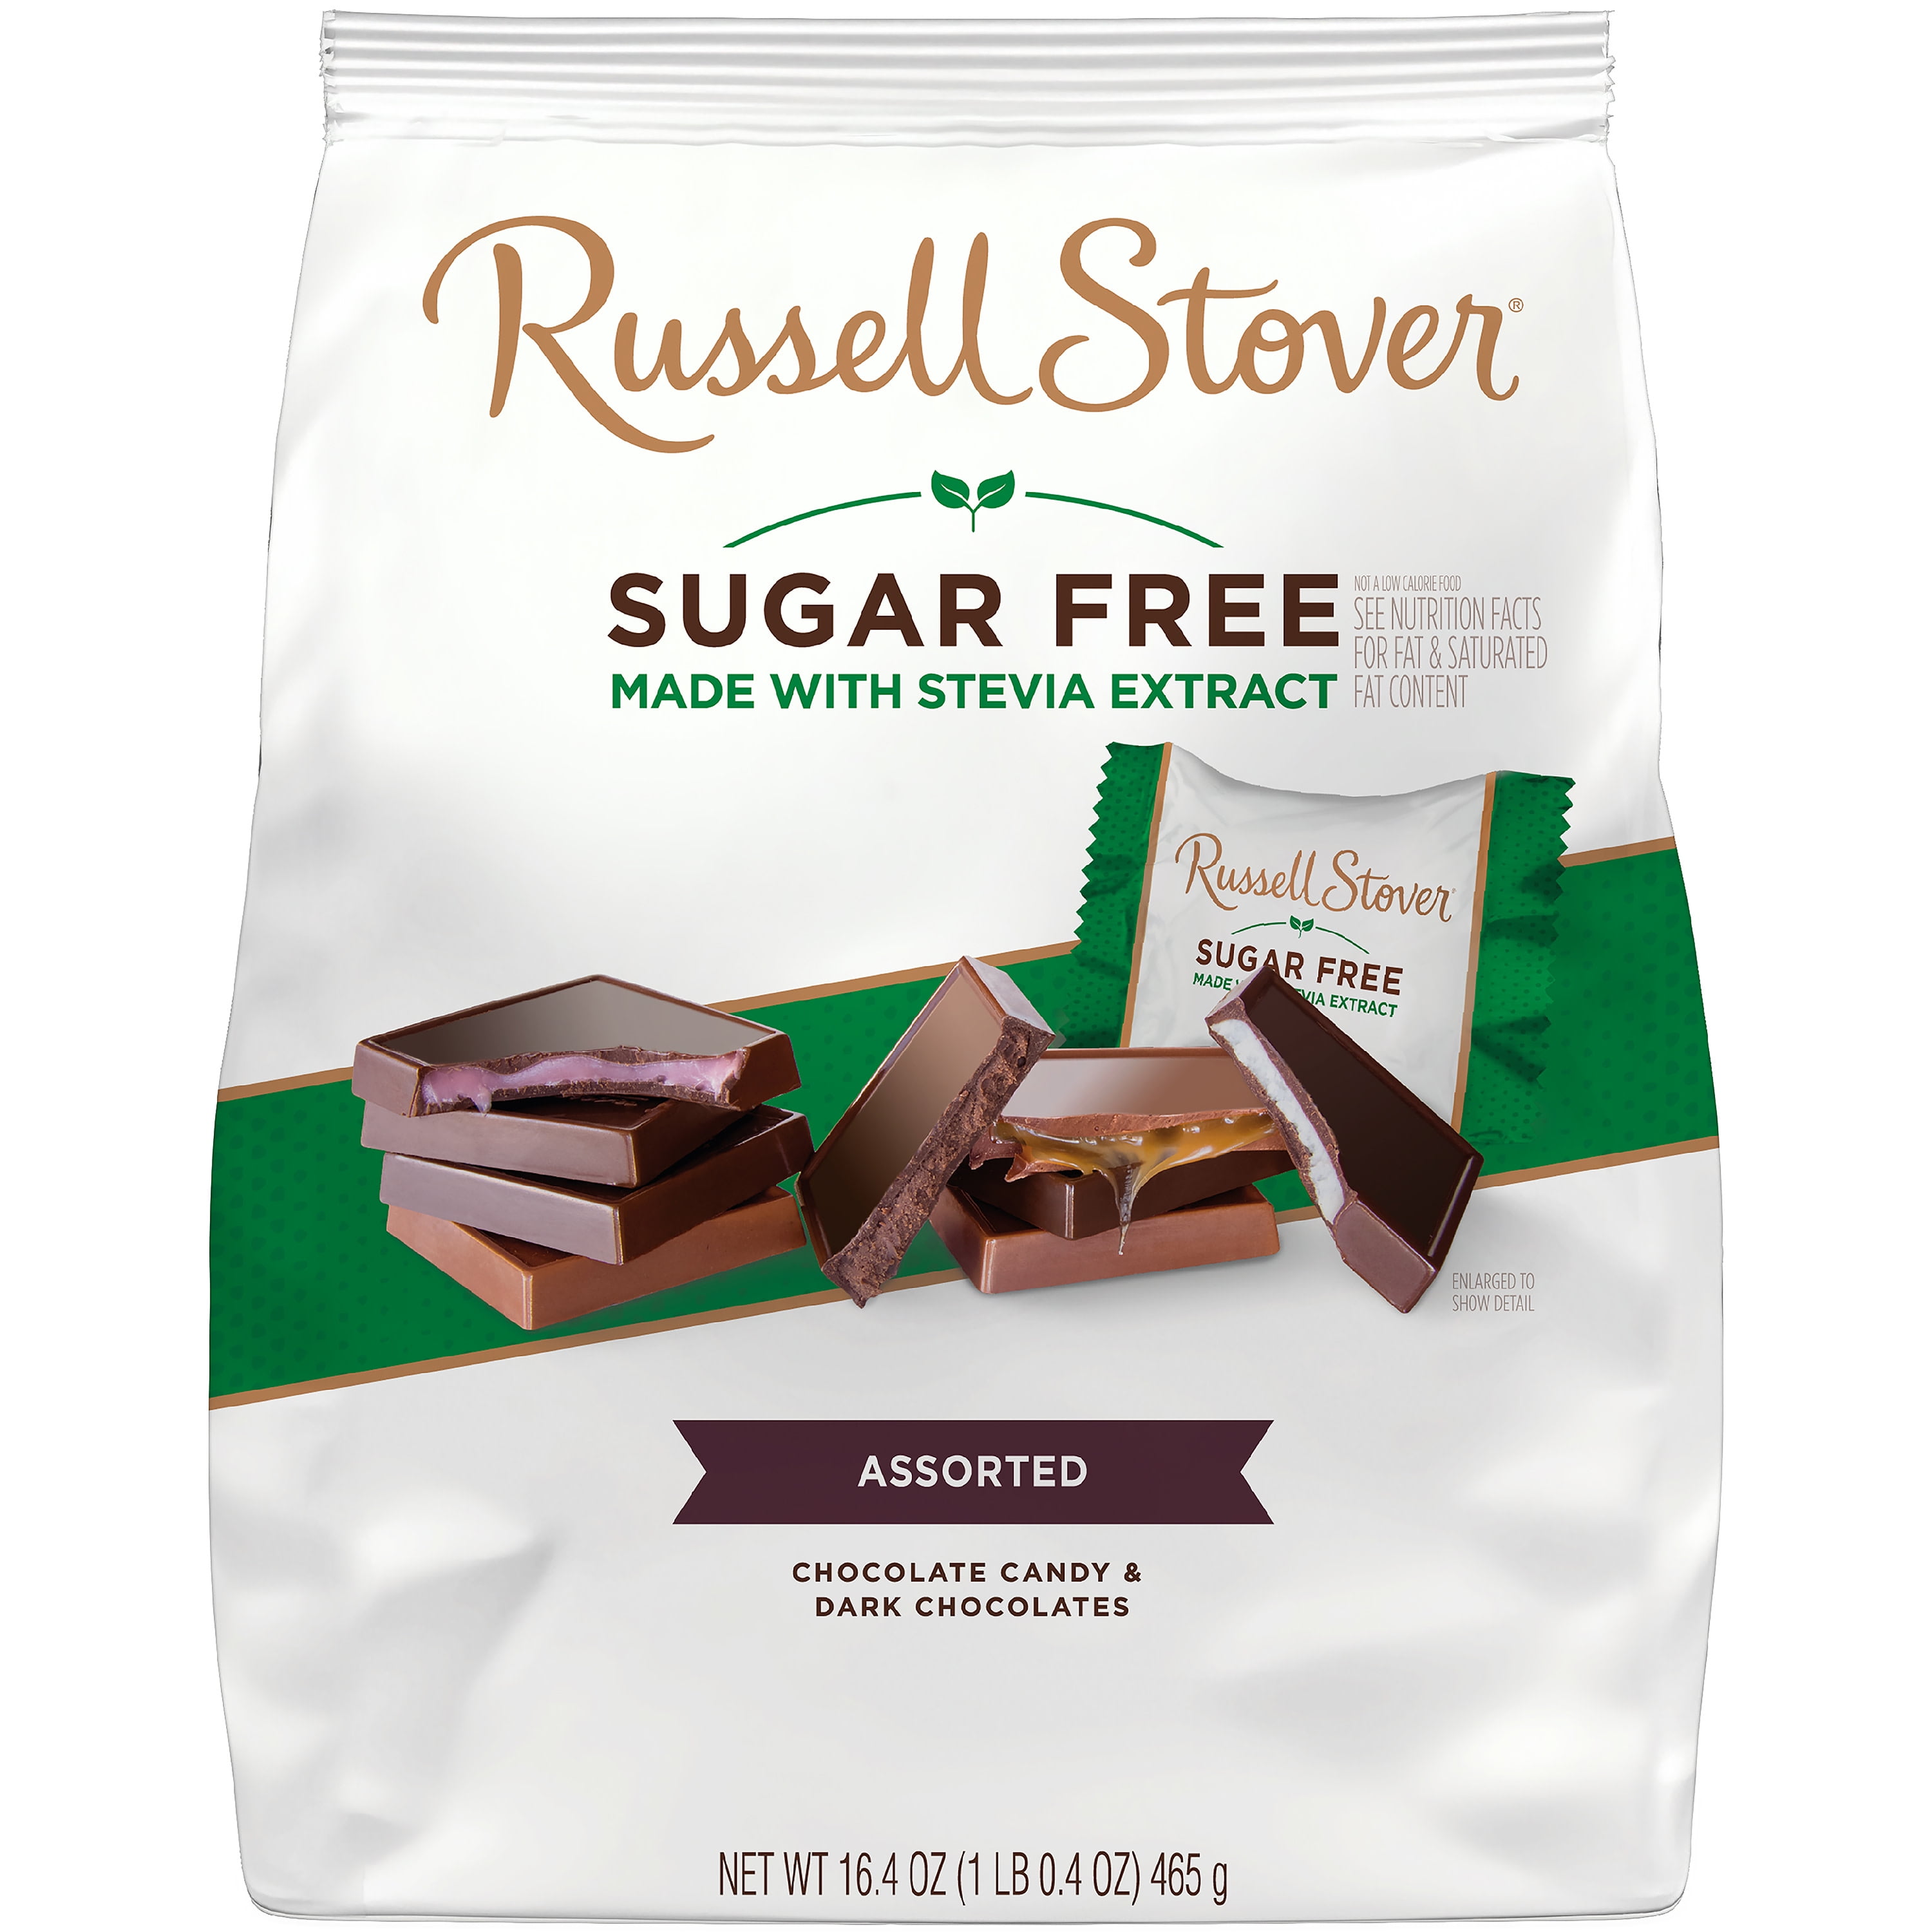 Russell Stover Sugar Free Assortment with 16.4 Bag -